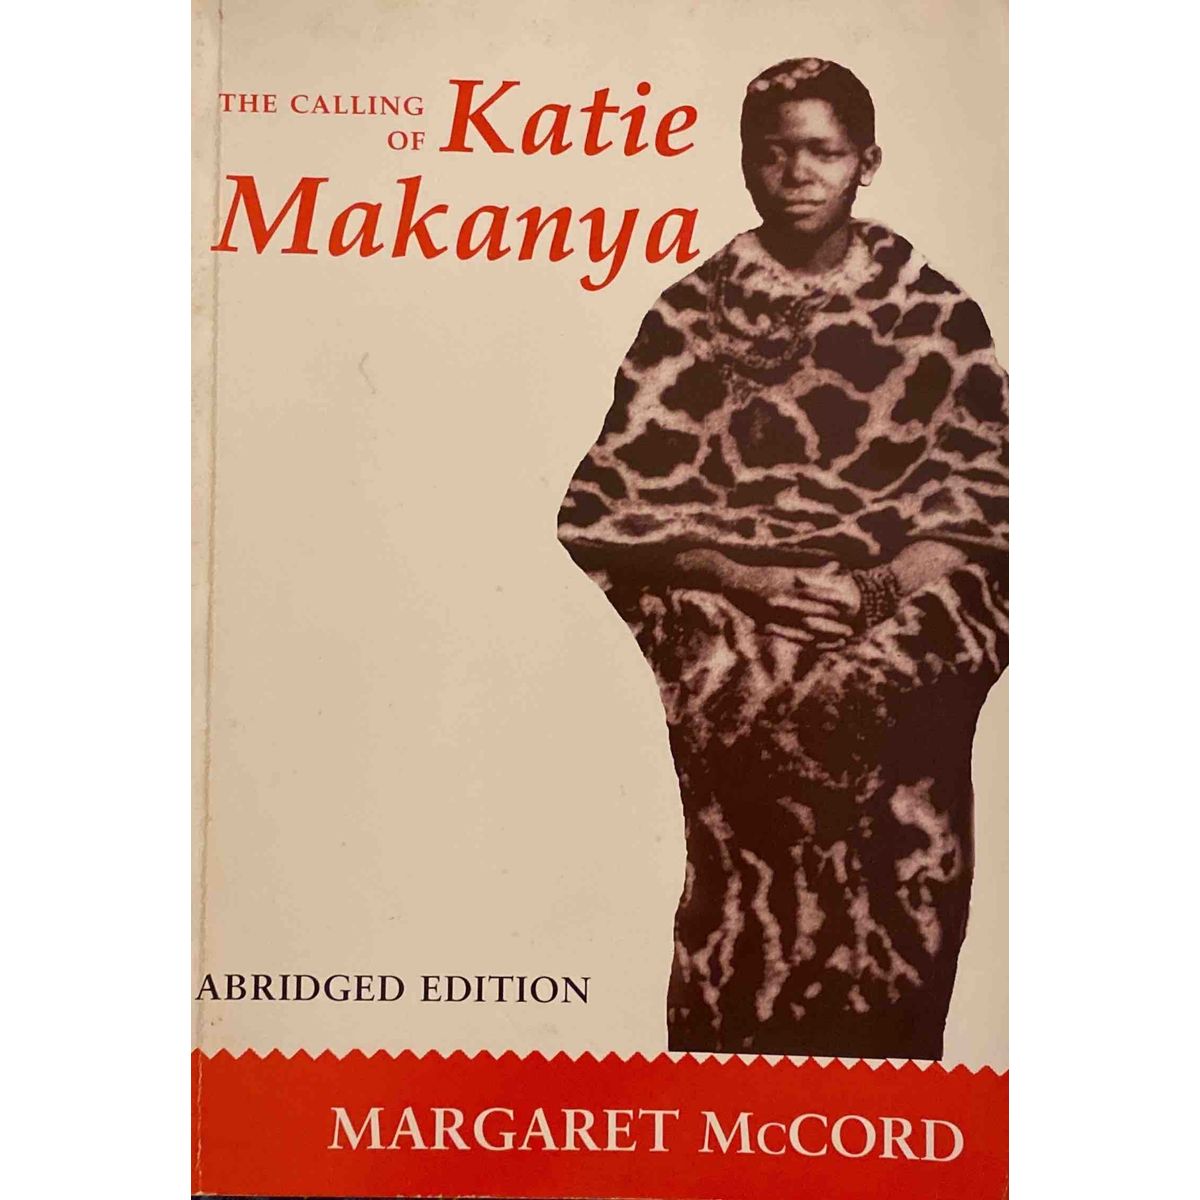 ISBN: 9780864863294 / 0864863292 - The Calling of Katie Makanya by Margaret McCord, abridged by Robert Malan [1997]